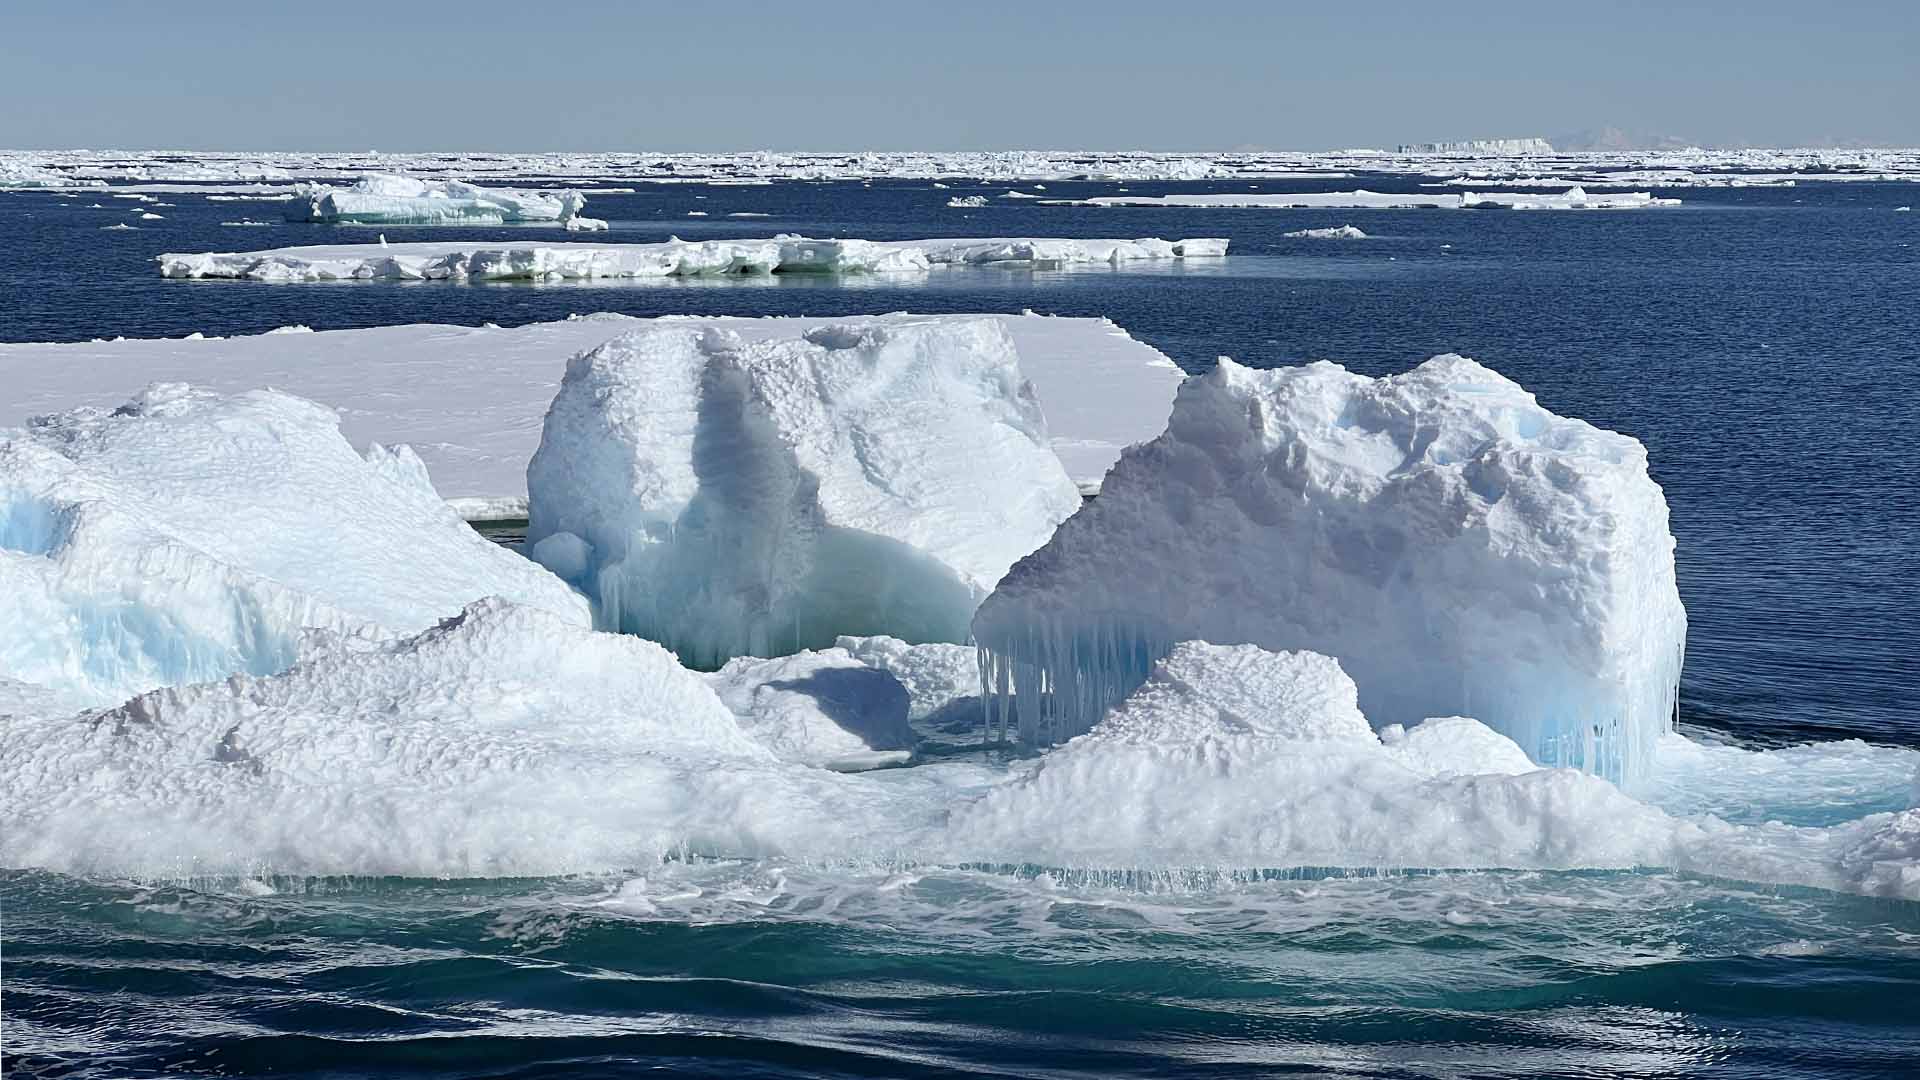 Photo of a large iceberg amidst the beautifully colored water